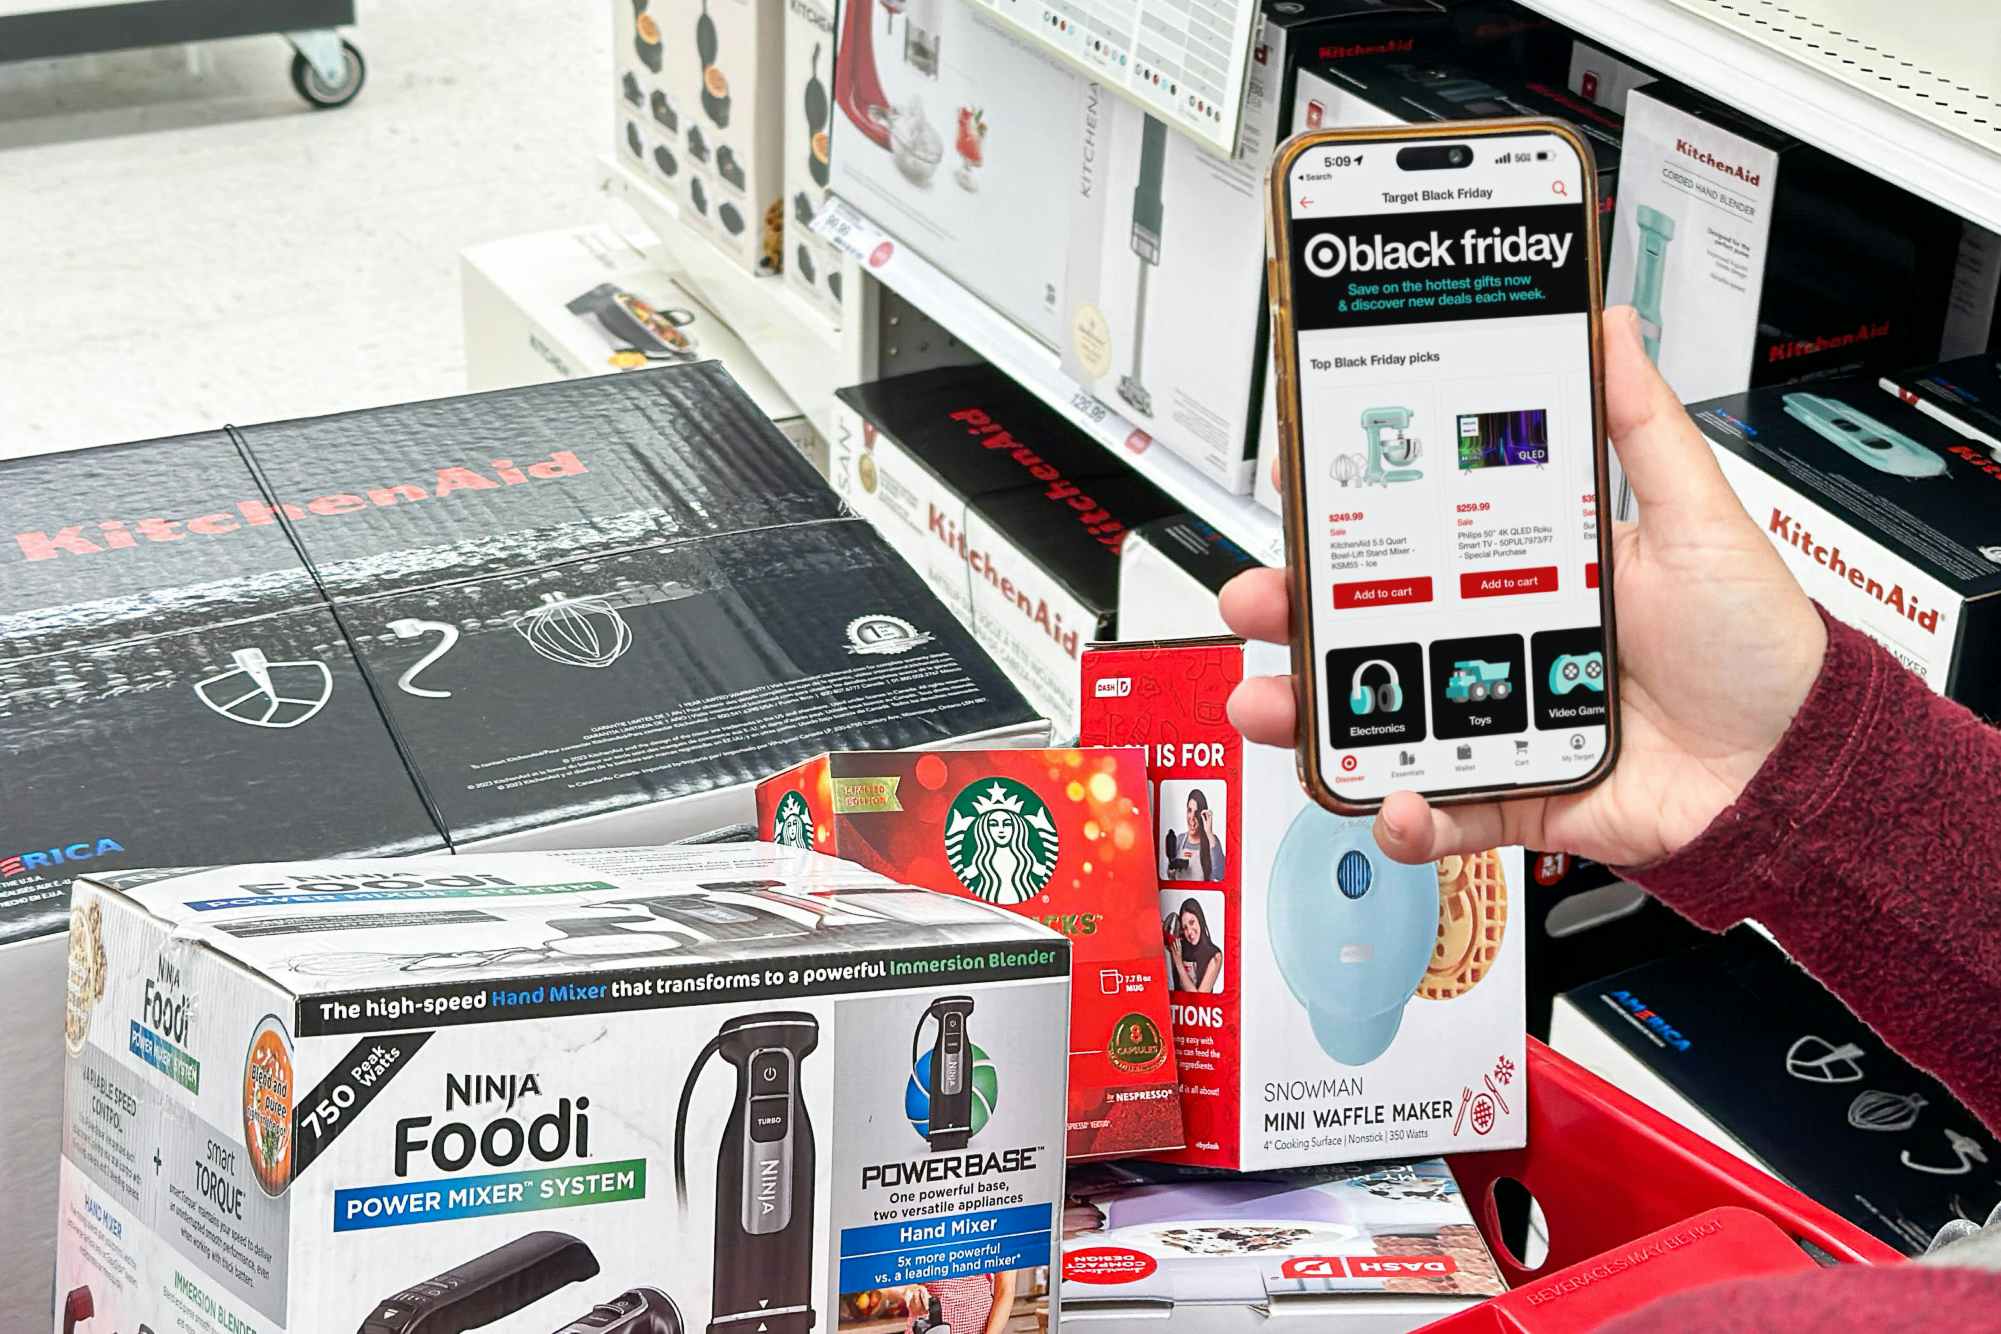 target app on phone being held in front of cart full of items